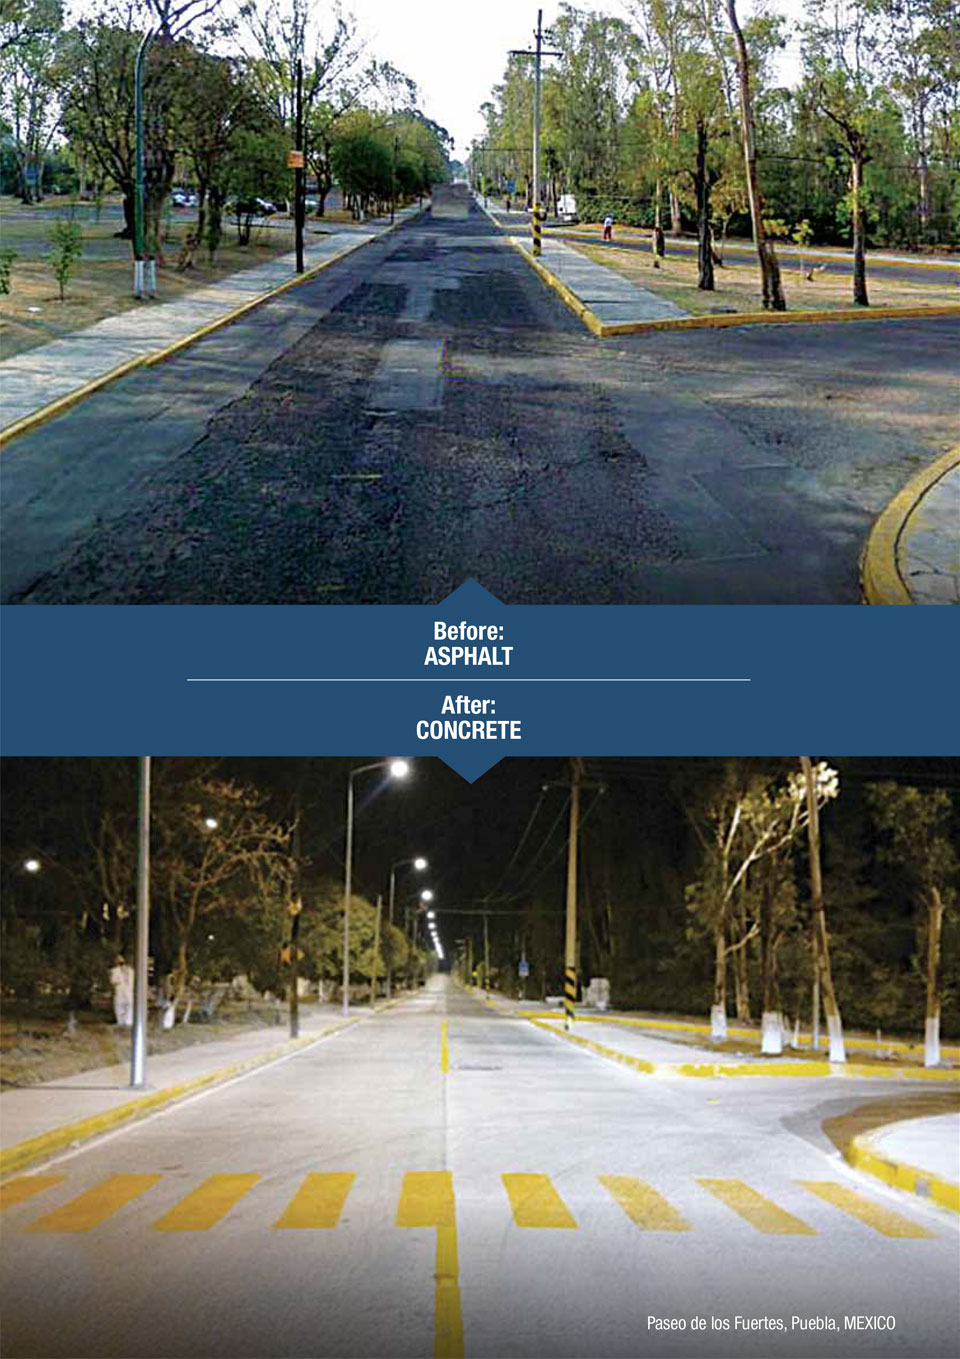 the image shows a before and after of a road using asphalt and then concrete